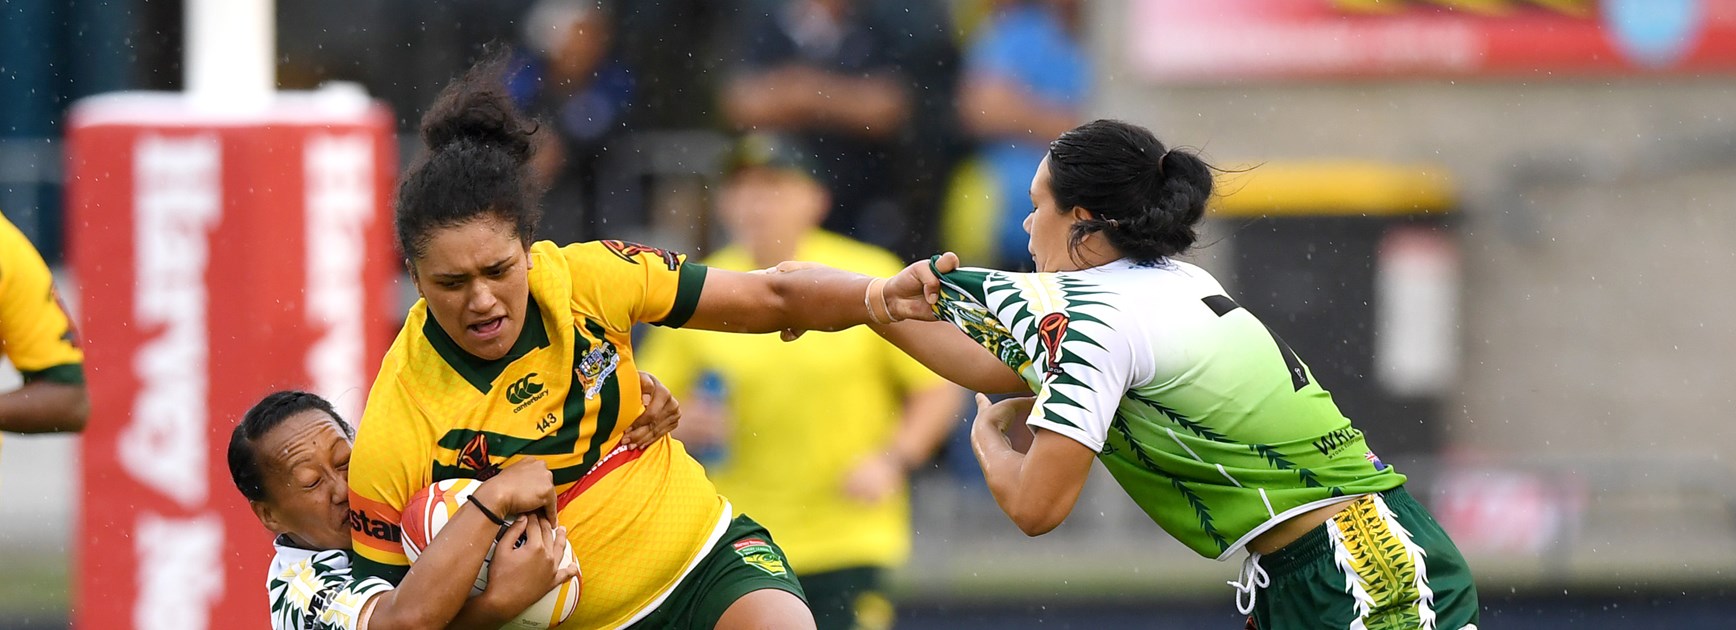 Women's Rugby League Talent ID and National Championship on the Gold Coast